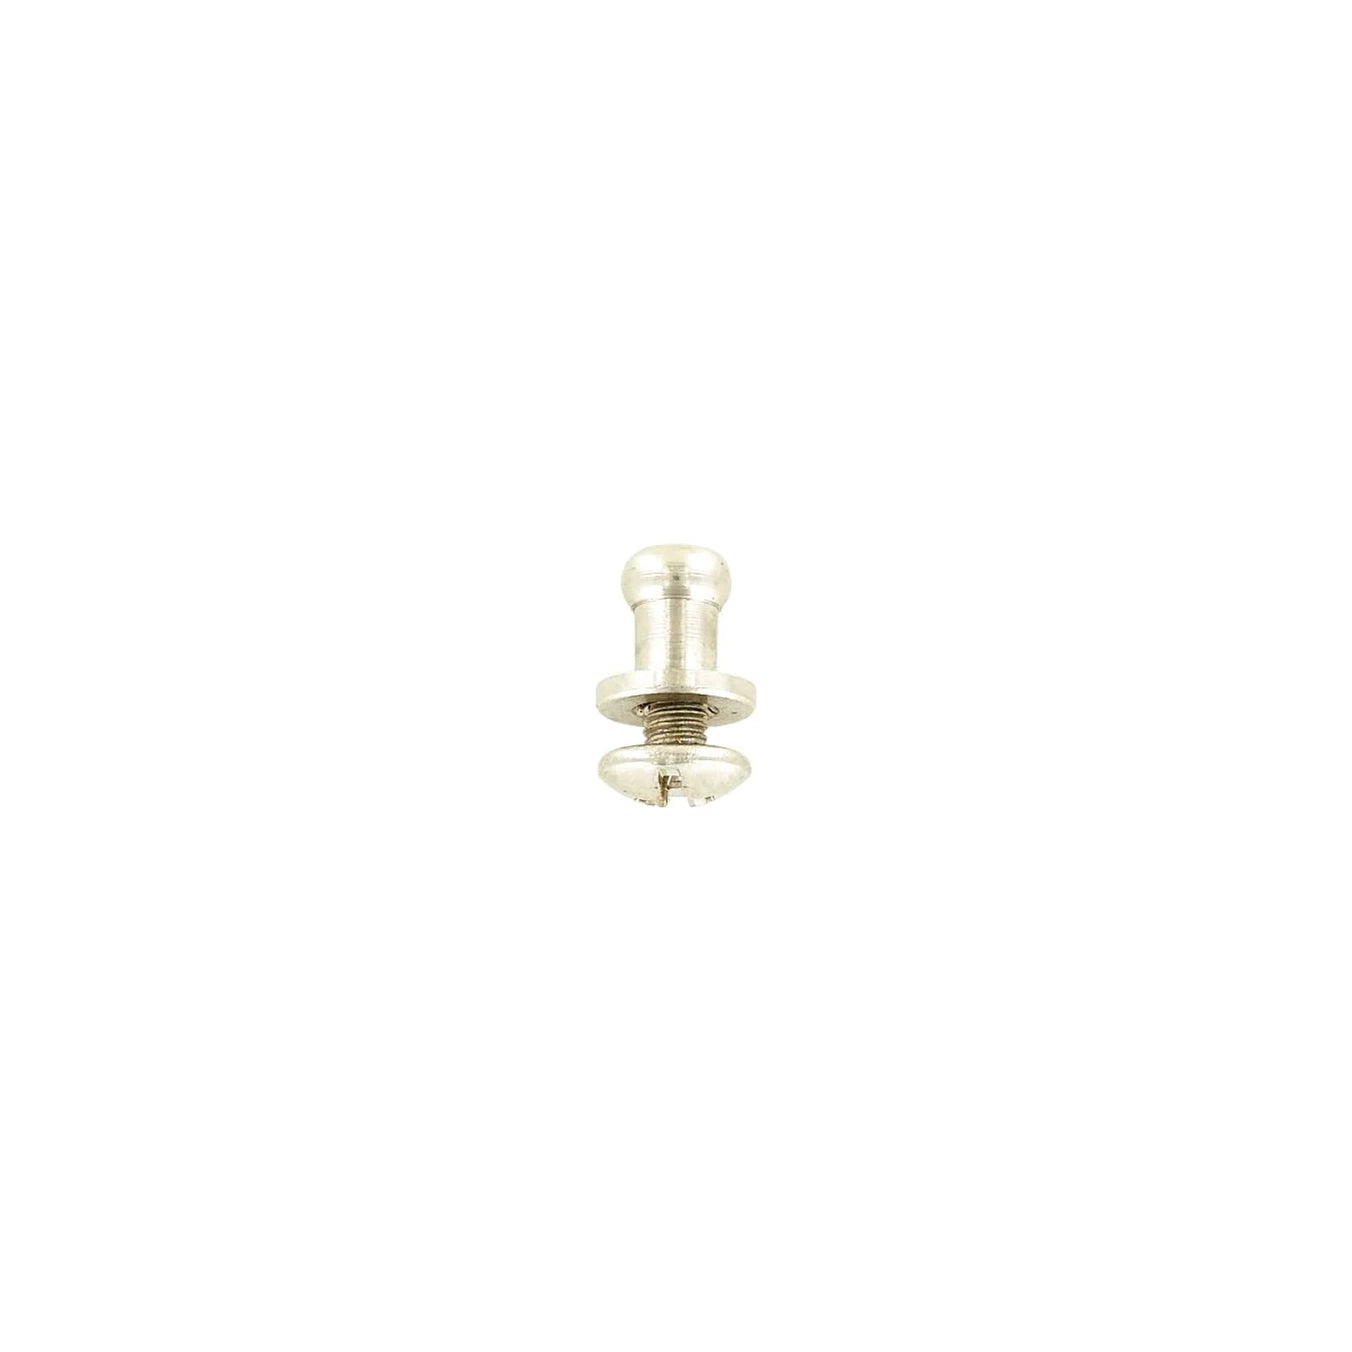 7mm, Nickel, Small Collar Button Stud with Screw, Solid Brass - PK5, #P-2712-SBN